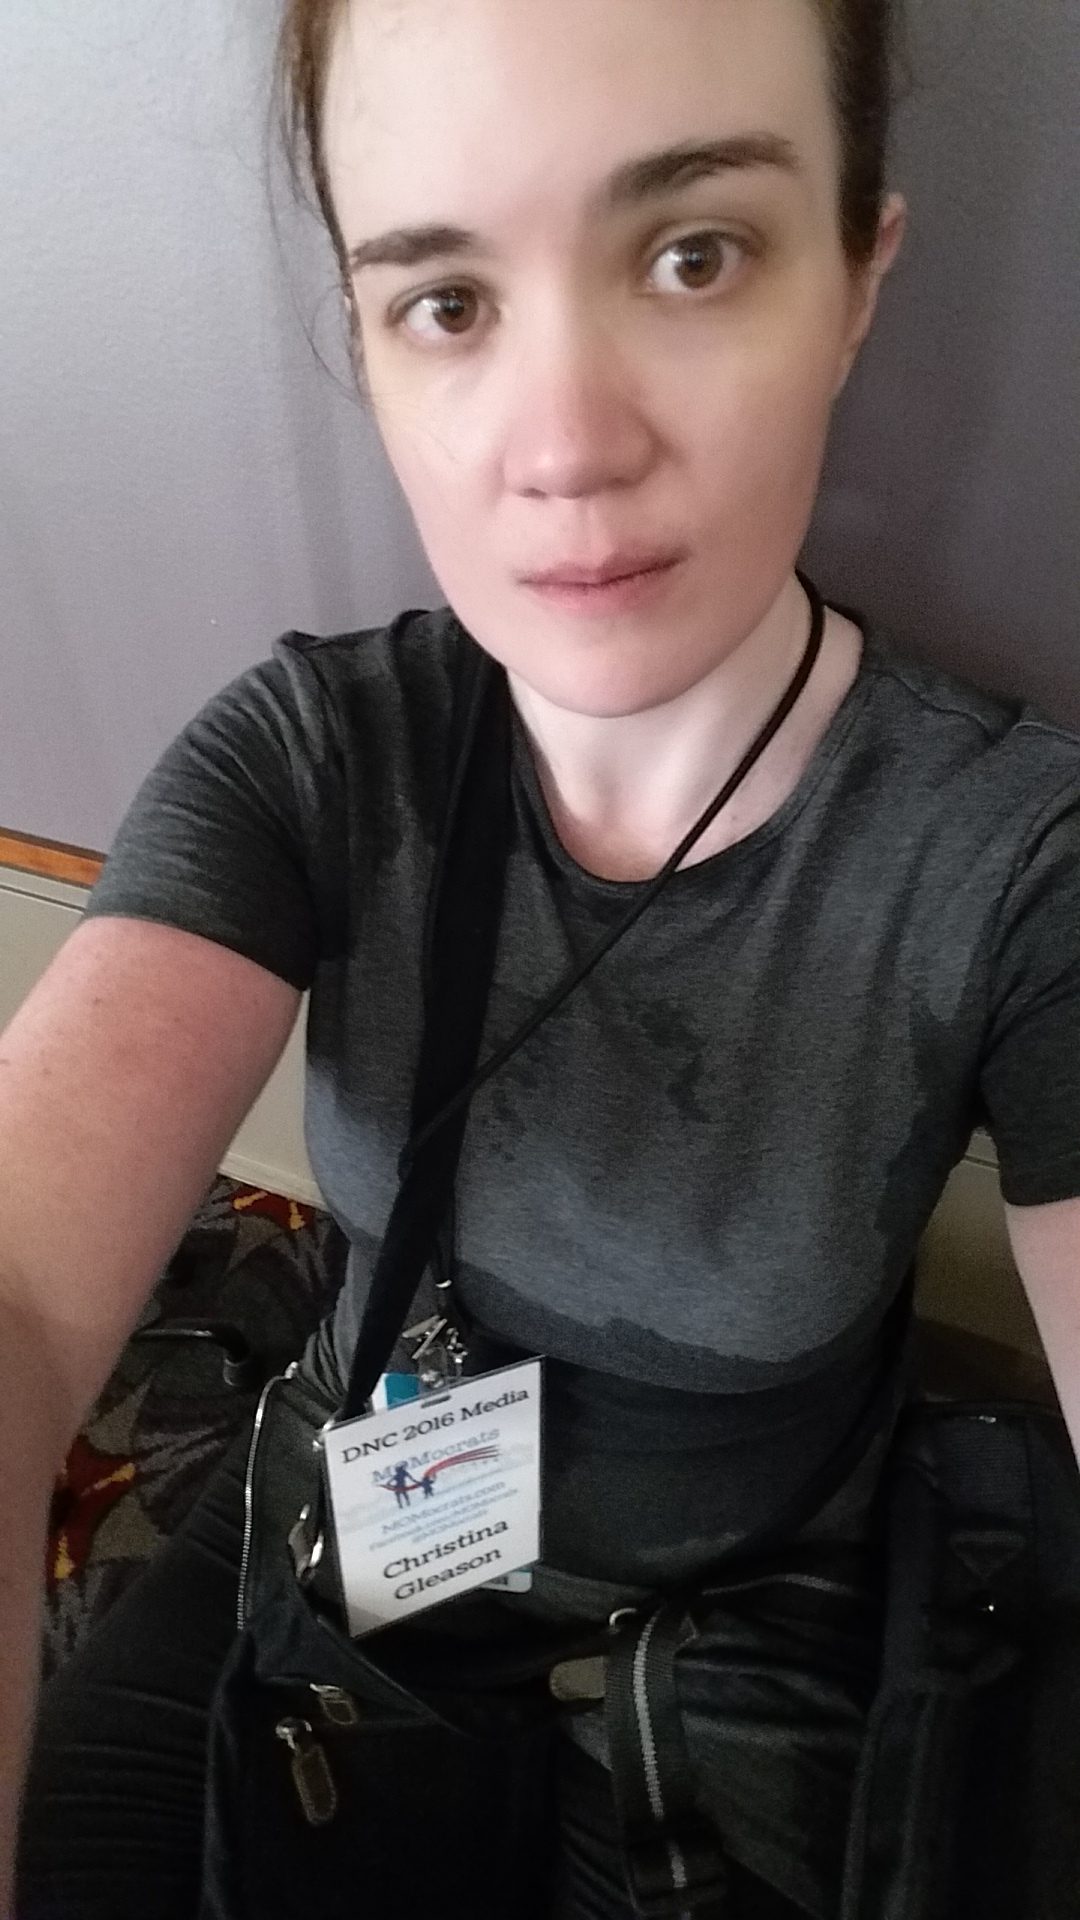 Christina Gleason, gaunt and soaked with sweat before getting properly diagnosed with her disabilities at the 2016 Democratic National Convention